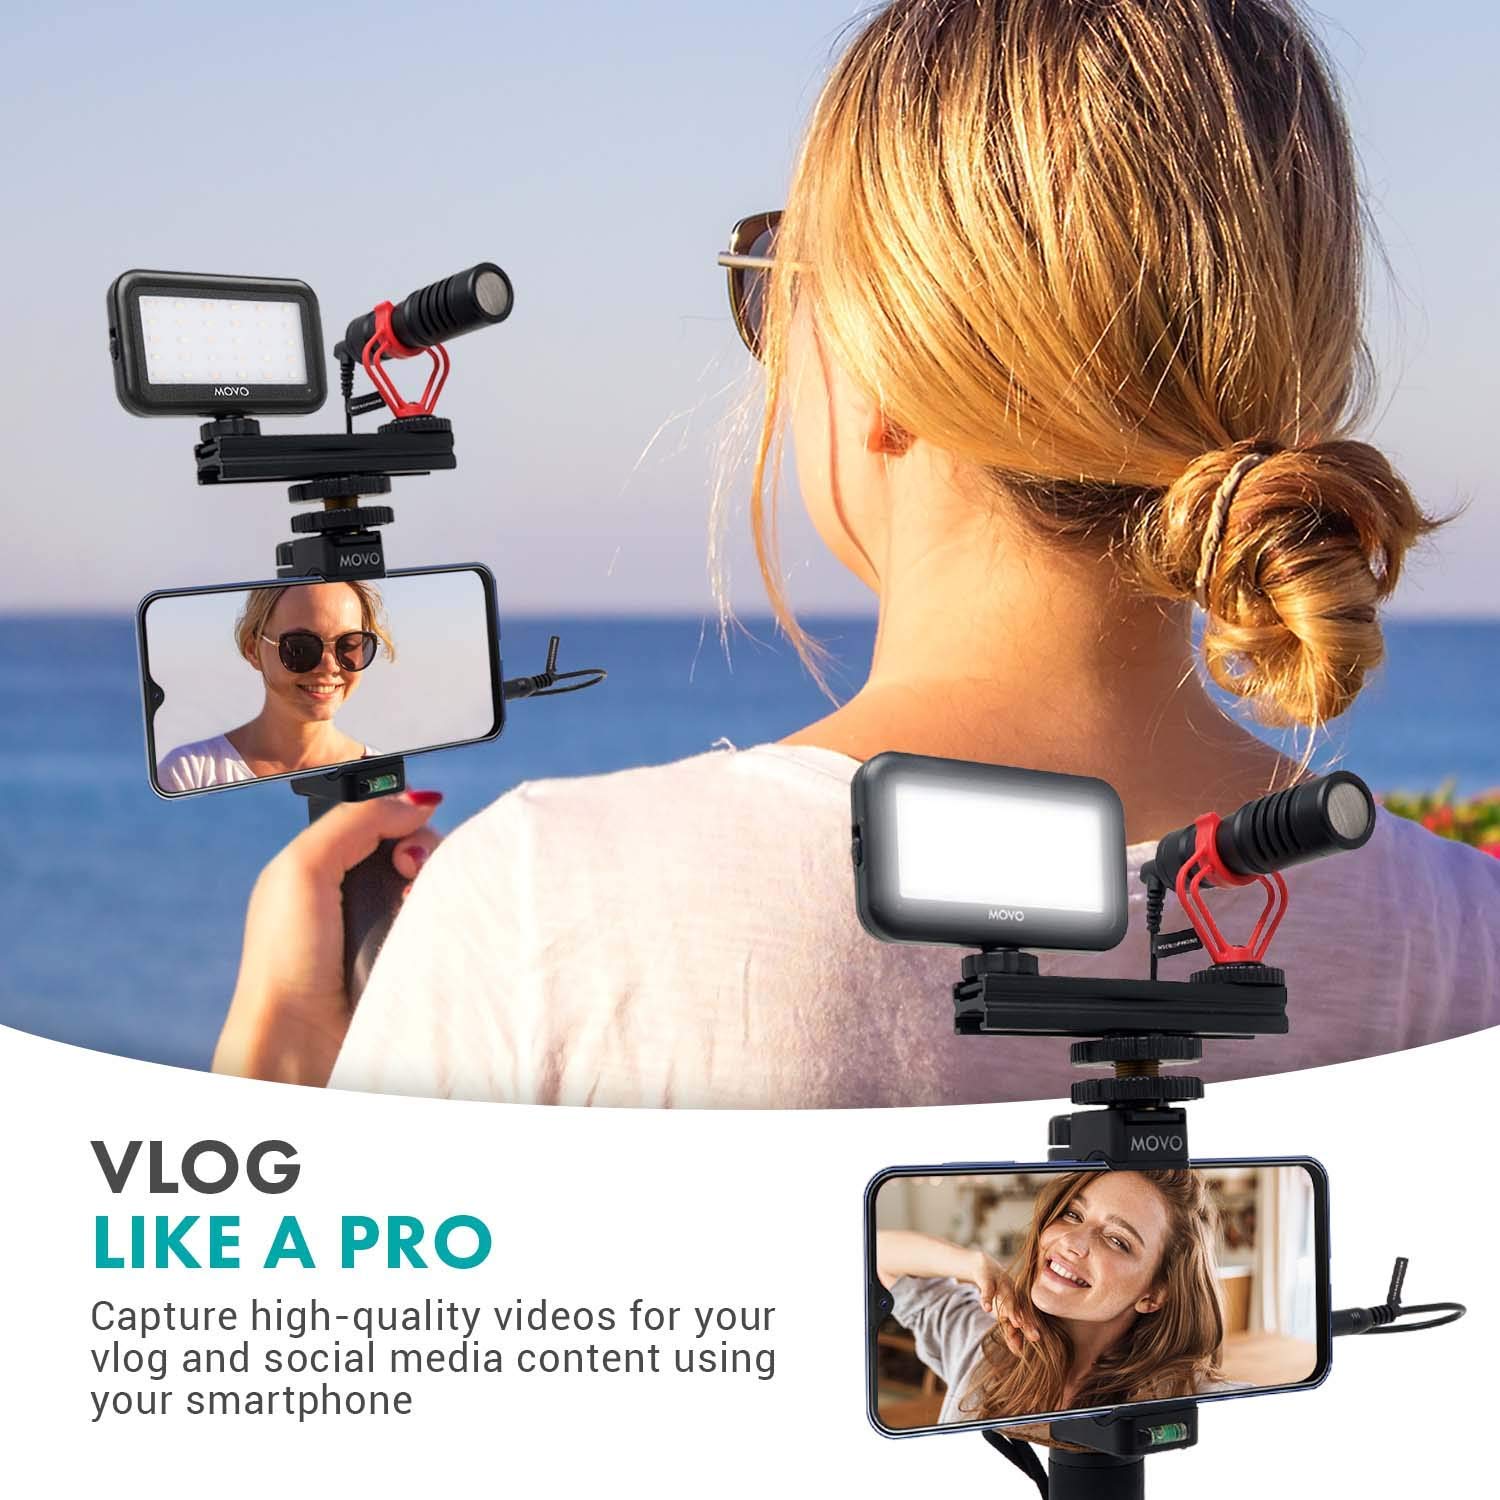 Movo Smartphone Video Kit V1 Vlogging Kit with Grip Rig, Shotgun Microphone, LED Light and Wireless Remote - YouTube Equipment Compatible with iPhone, Android Samsung Galaxy, Note - Vlogging Equipment  - Good